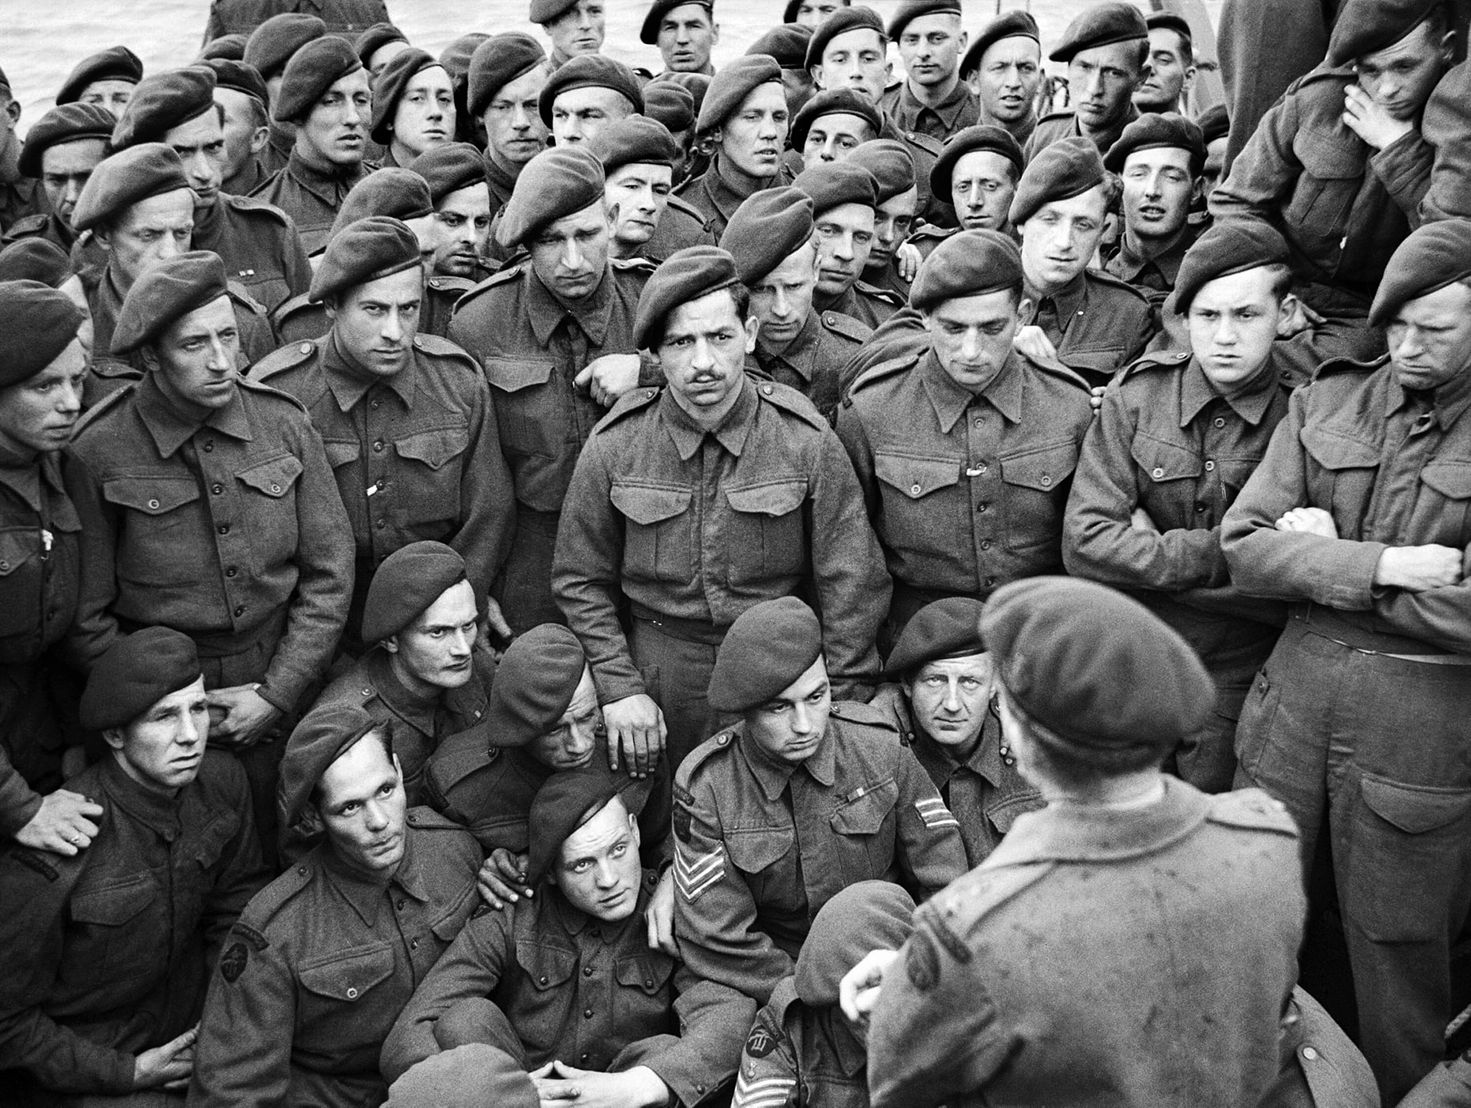 Lieutenant Colonel Robert W.P. Dawson briefs his men of No. 4 Commando, 1st Special Service Brigade, aboard the landing ship infantry (LCI) Maid of Orleans on June 5, 1944, the eve of D-Day.